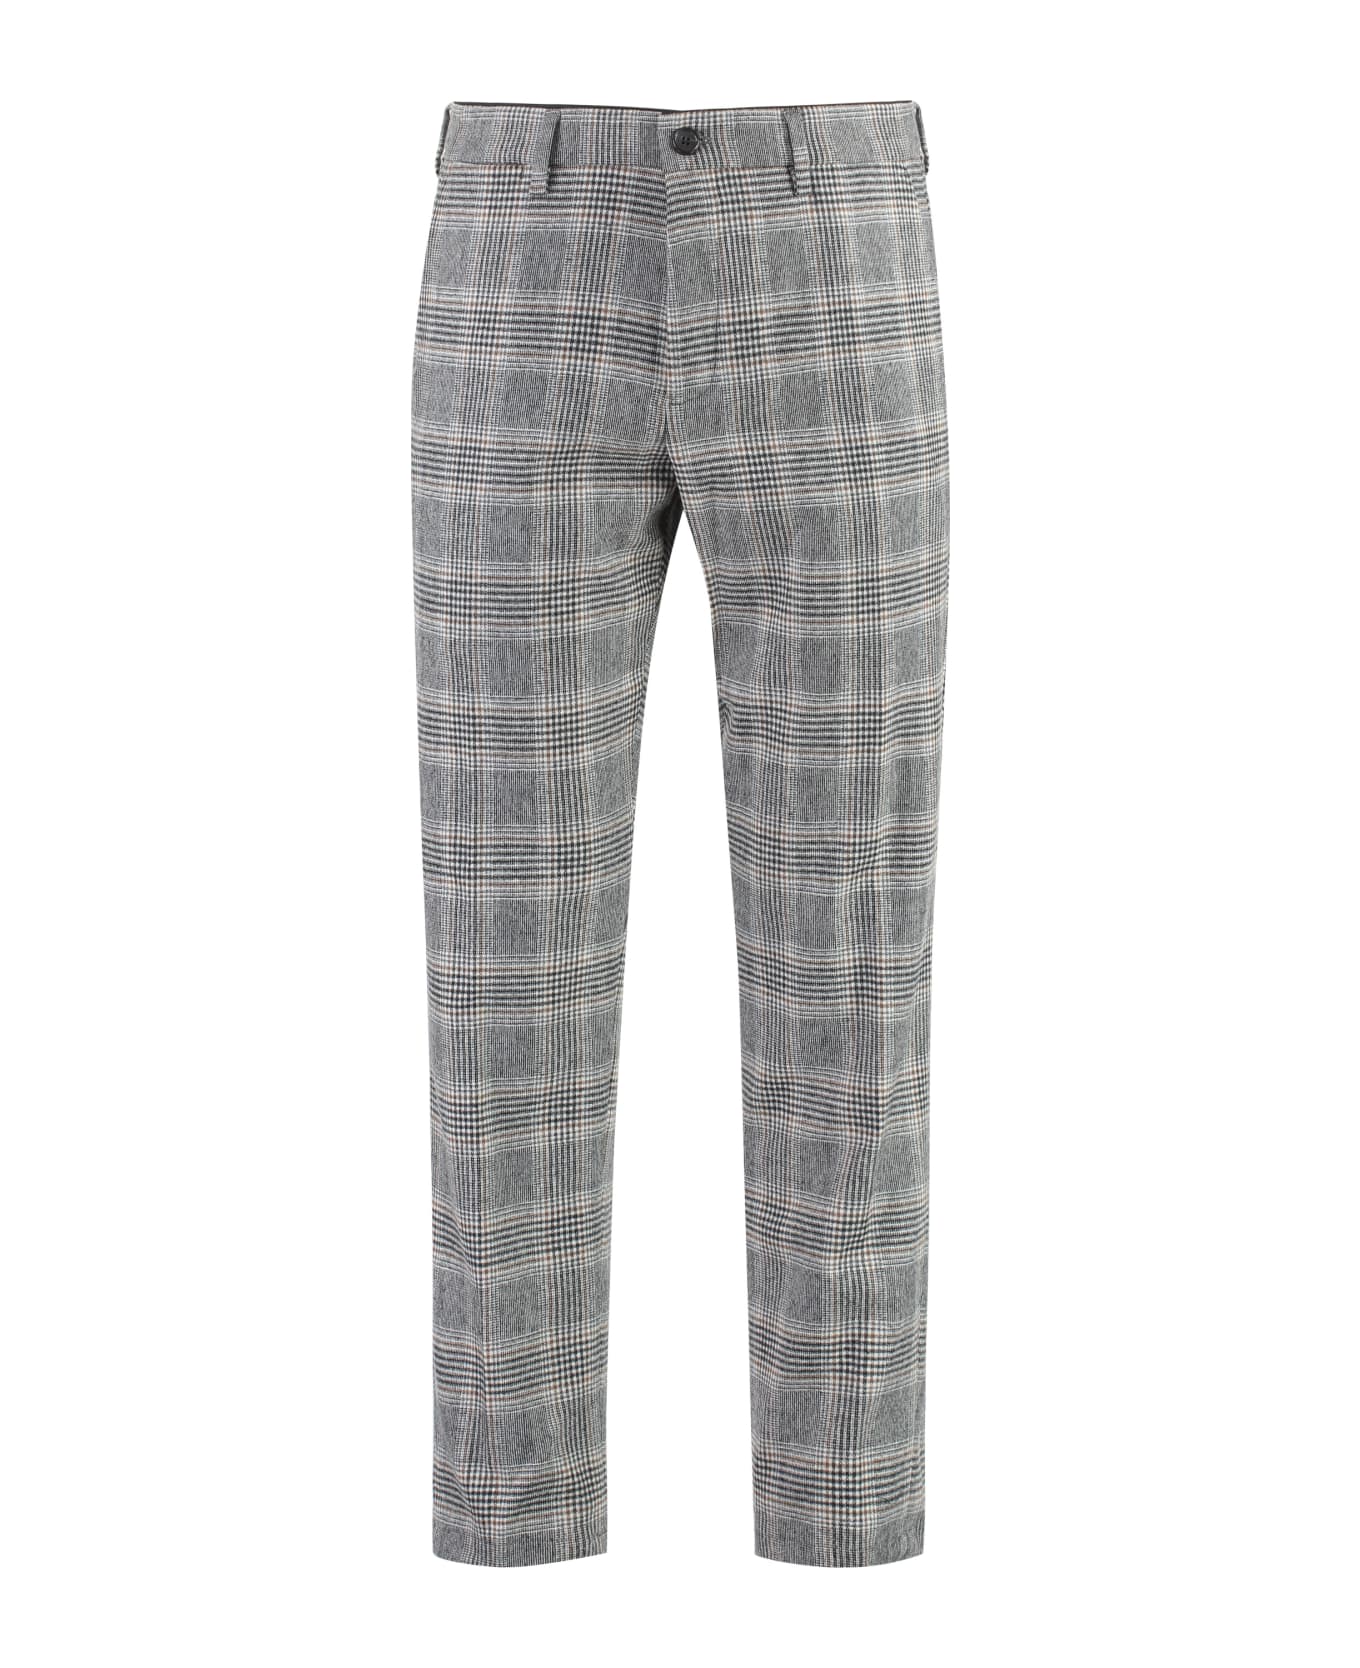 Department Five Setter Chino Pants In Wool Blend - grey